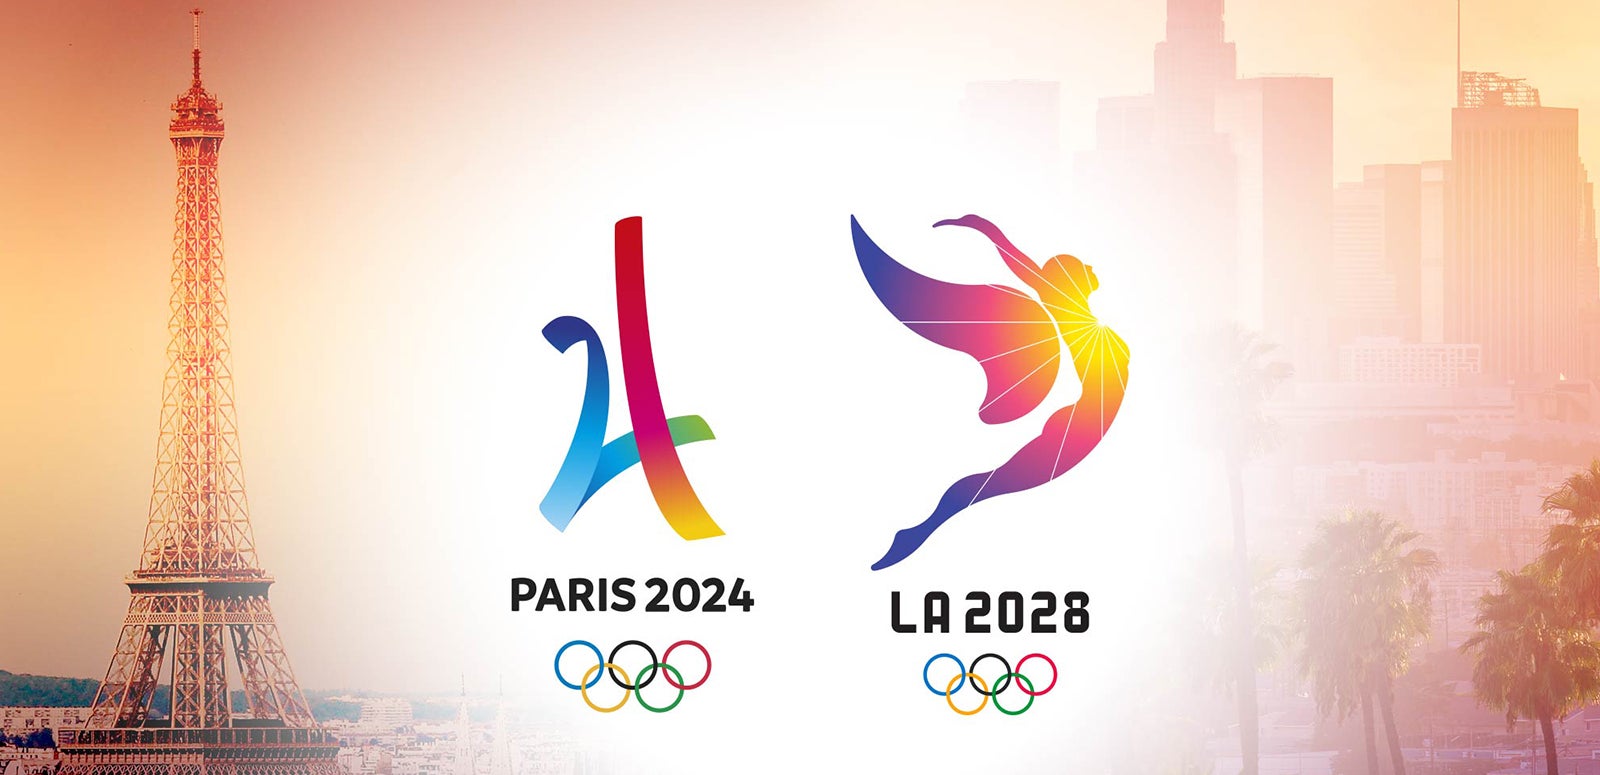 It's official! Los Angeles awarded 2028 Olympic Games Dignity Health